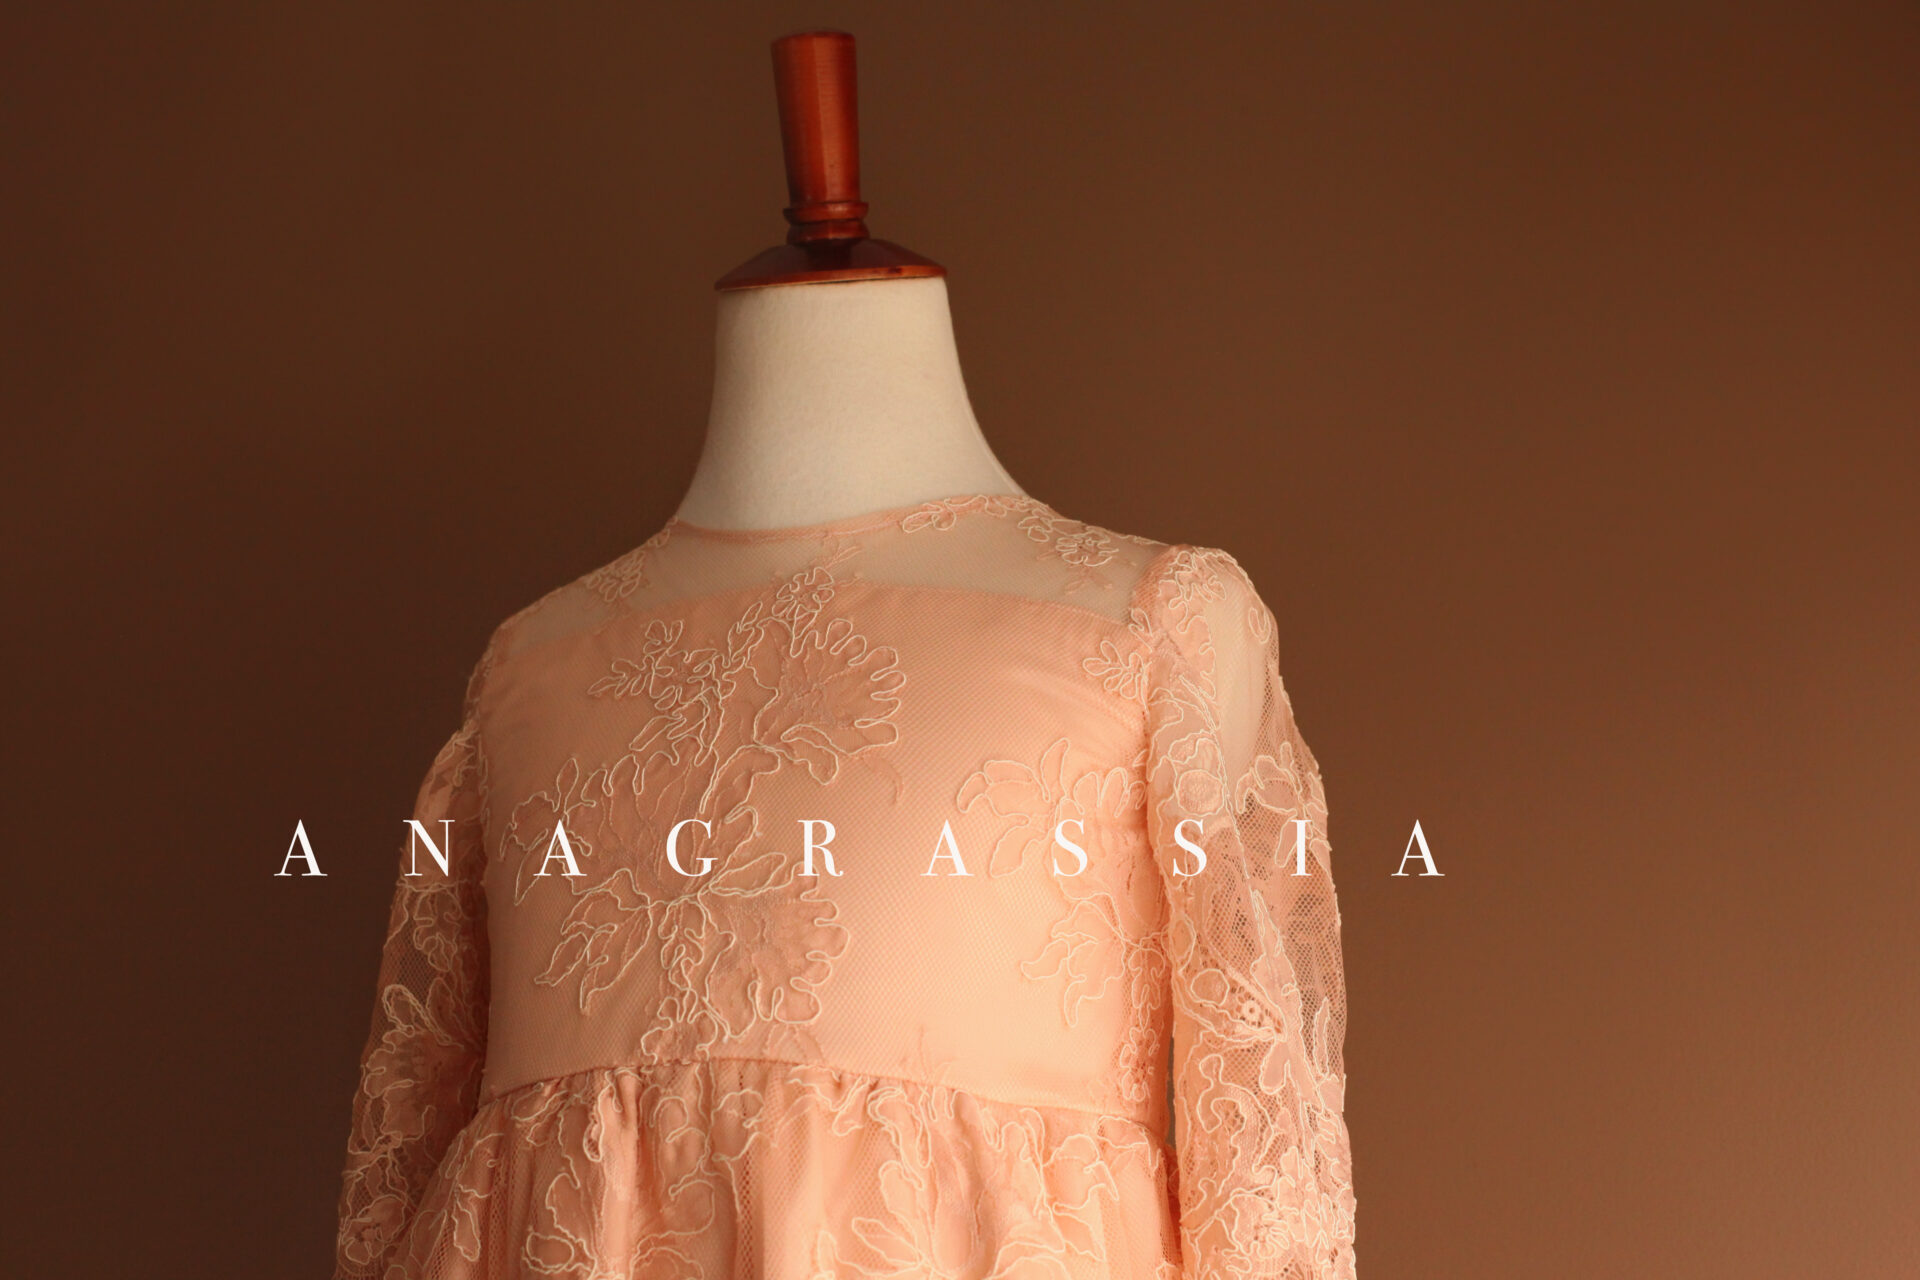 Isabel Blush Pink Silk Cotton Illusion Sweetheart Neckline Unlined Long Sleeve Scallop Lace Edge Easter Communion Flower Girls Couture Handmade Girl Dress Sew